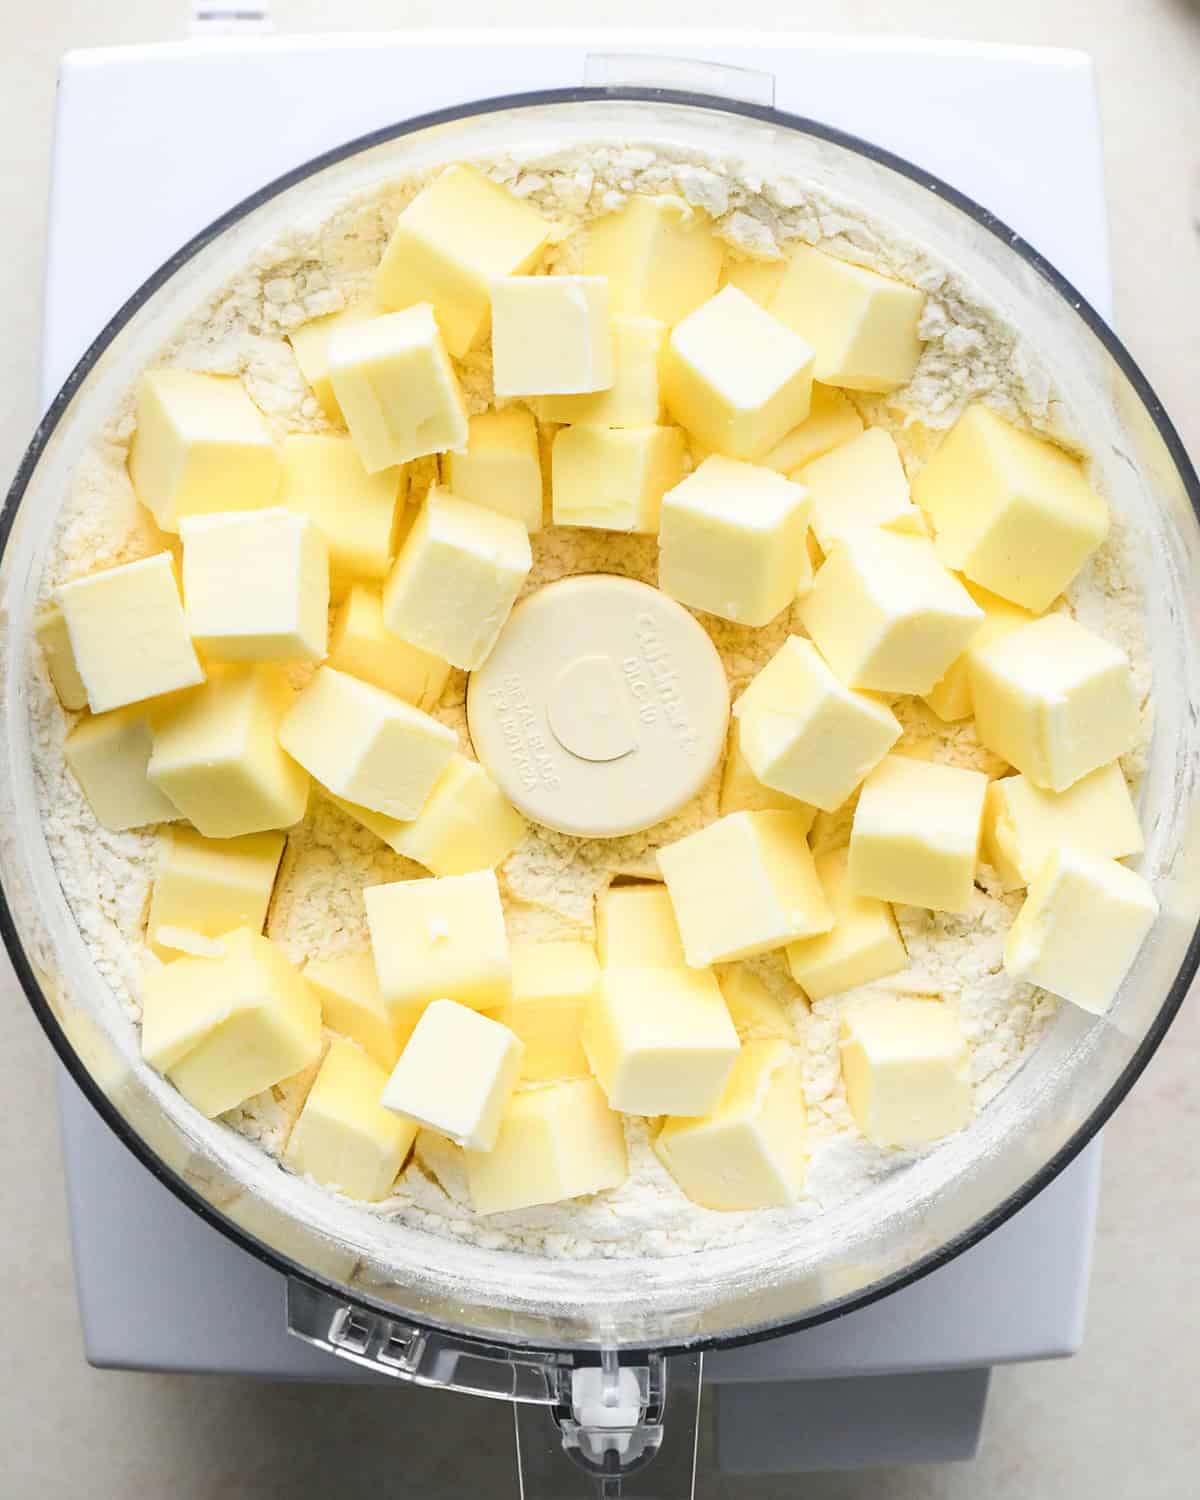 How to Make Quiche crust - butter and water added to the dry ingredients in a food processor before mixing